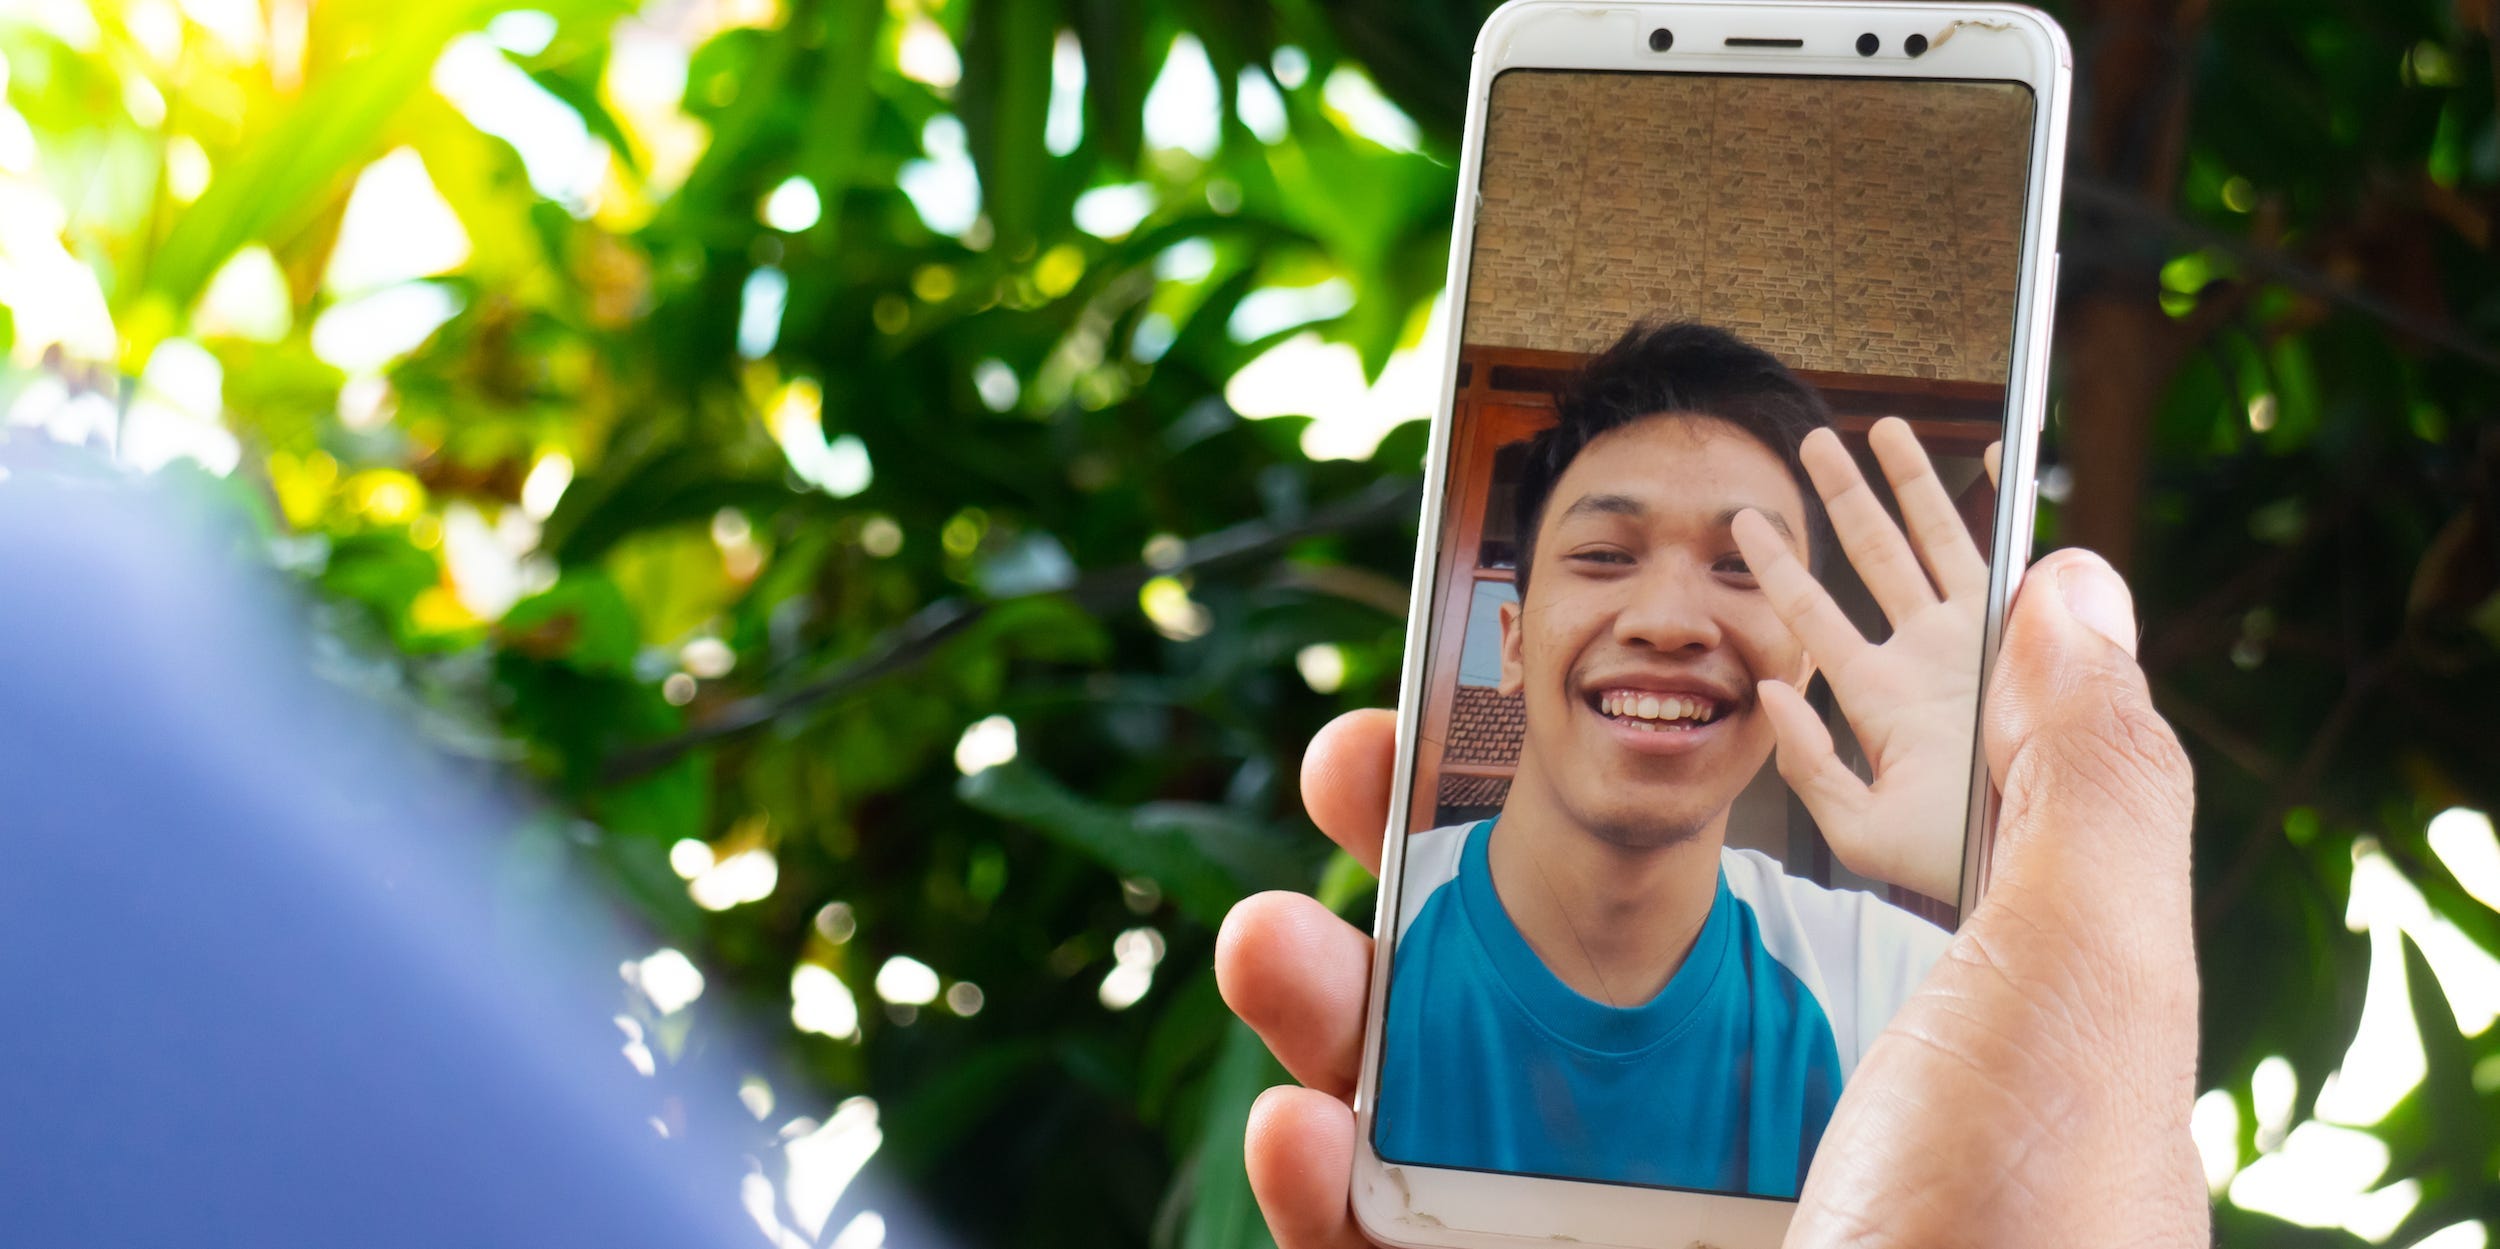 Close-up of a video chat call on a smartphone, person waving hello